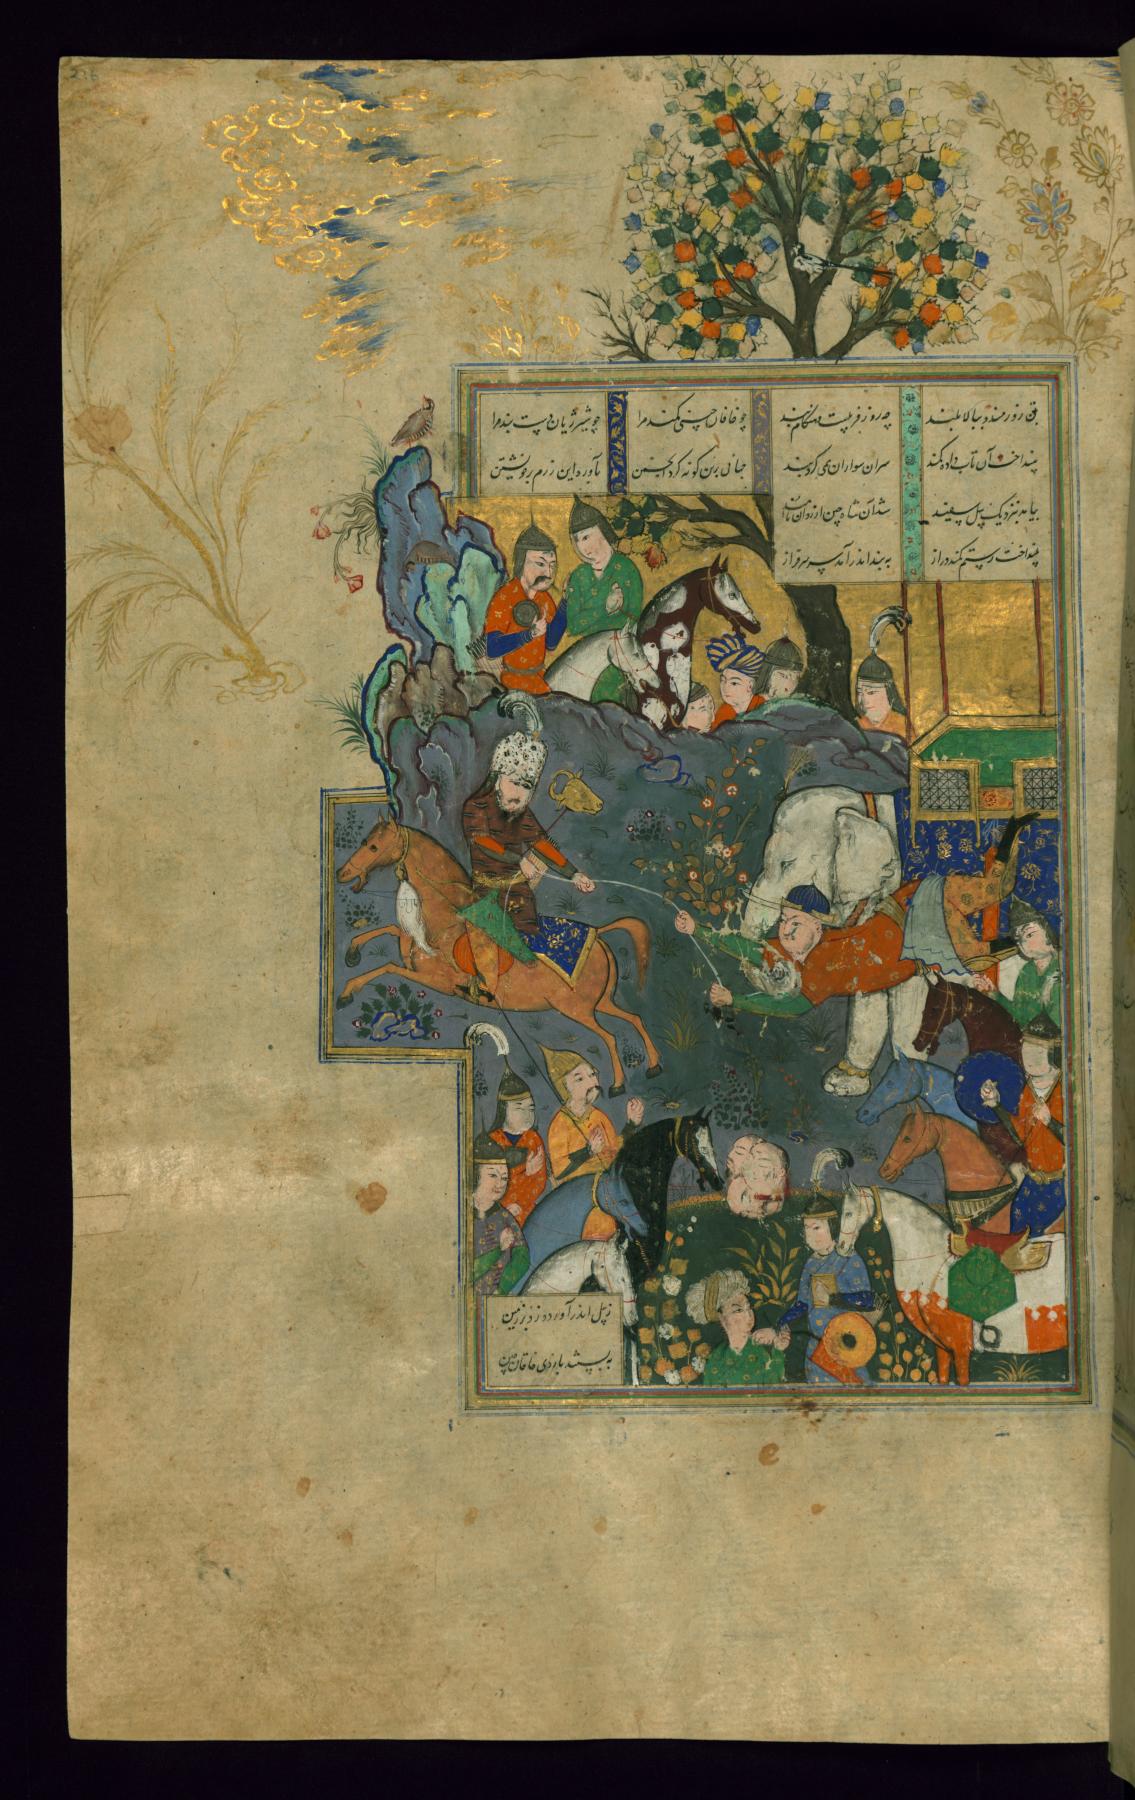 Rustam Pulls The Khaqan Of China From His Elephant By A Lasso